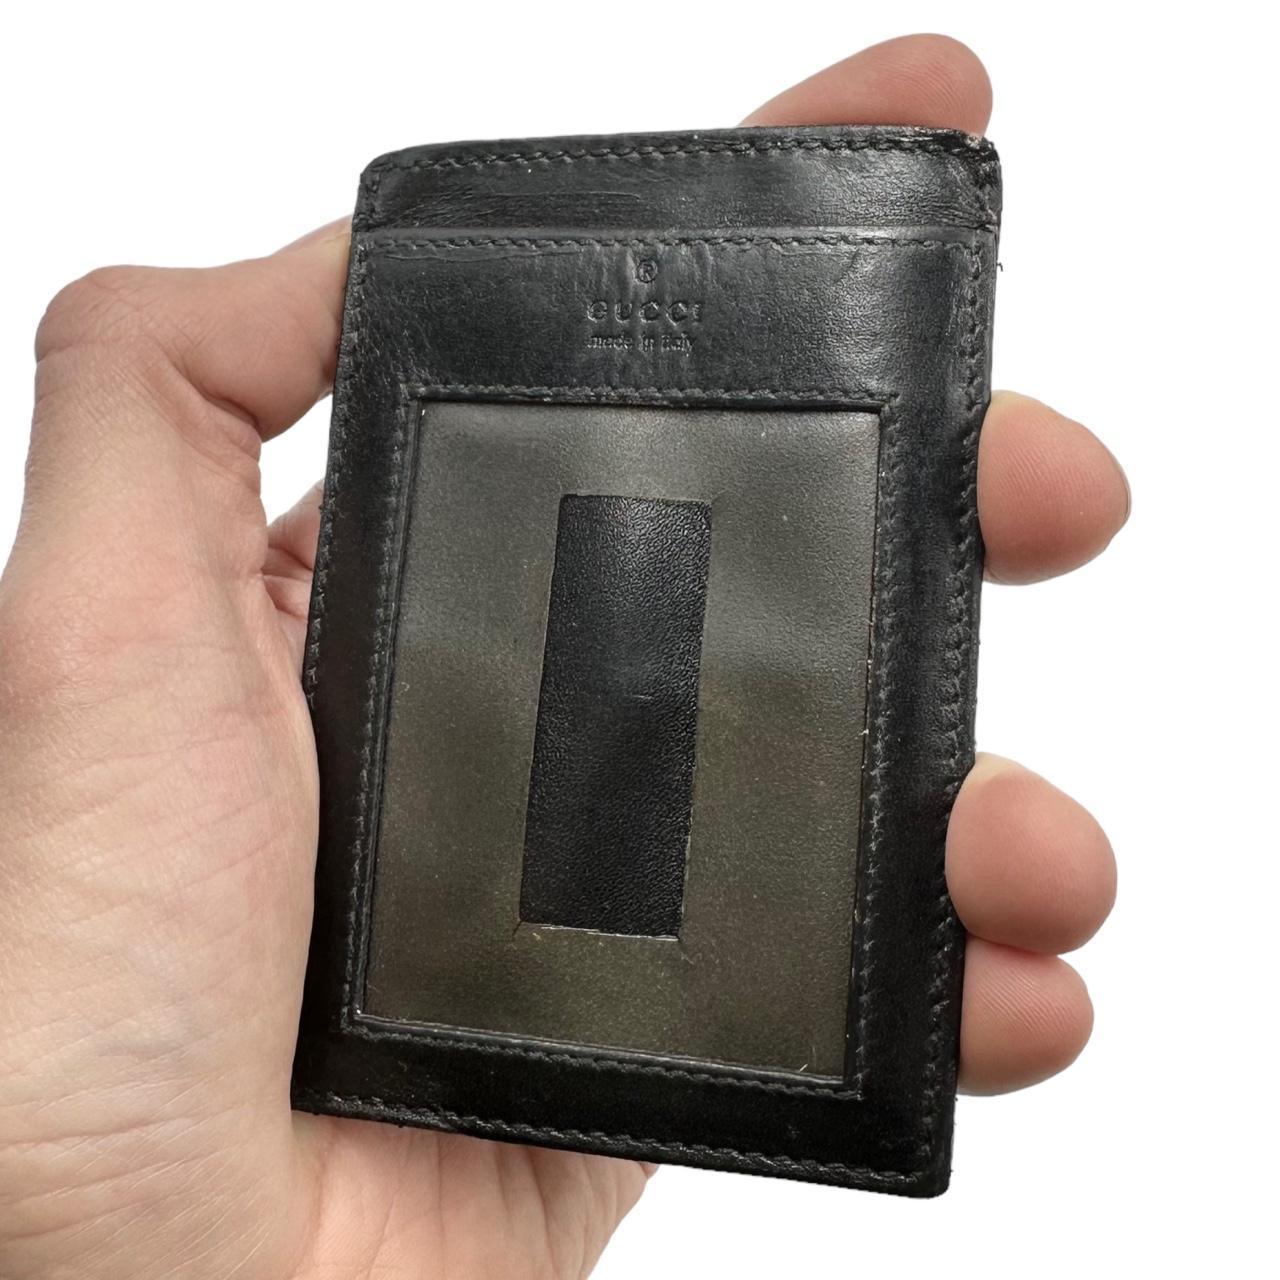 Vintage Gucci Card Holder - Known Source